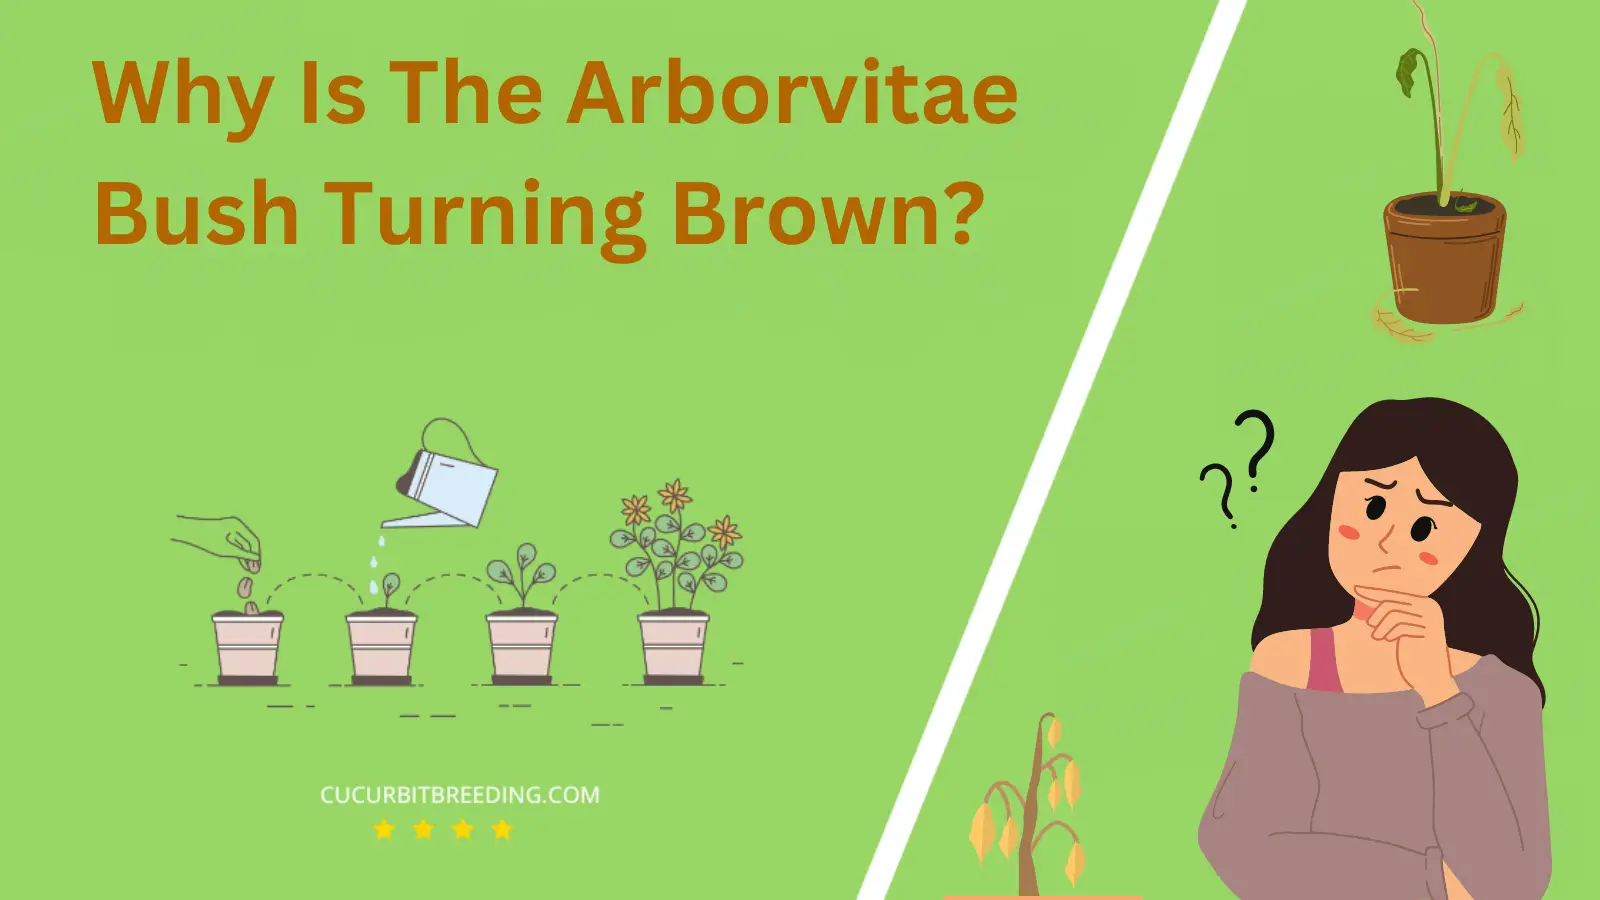 Why Is The Arborvitae Bush Turning Brown